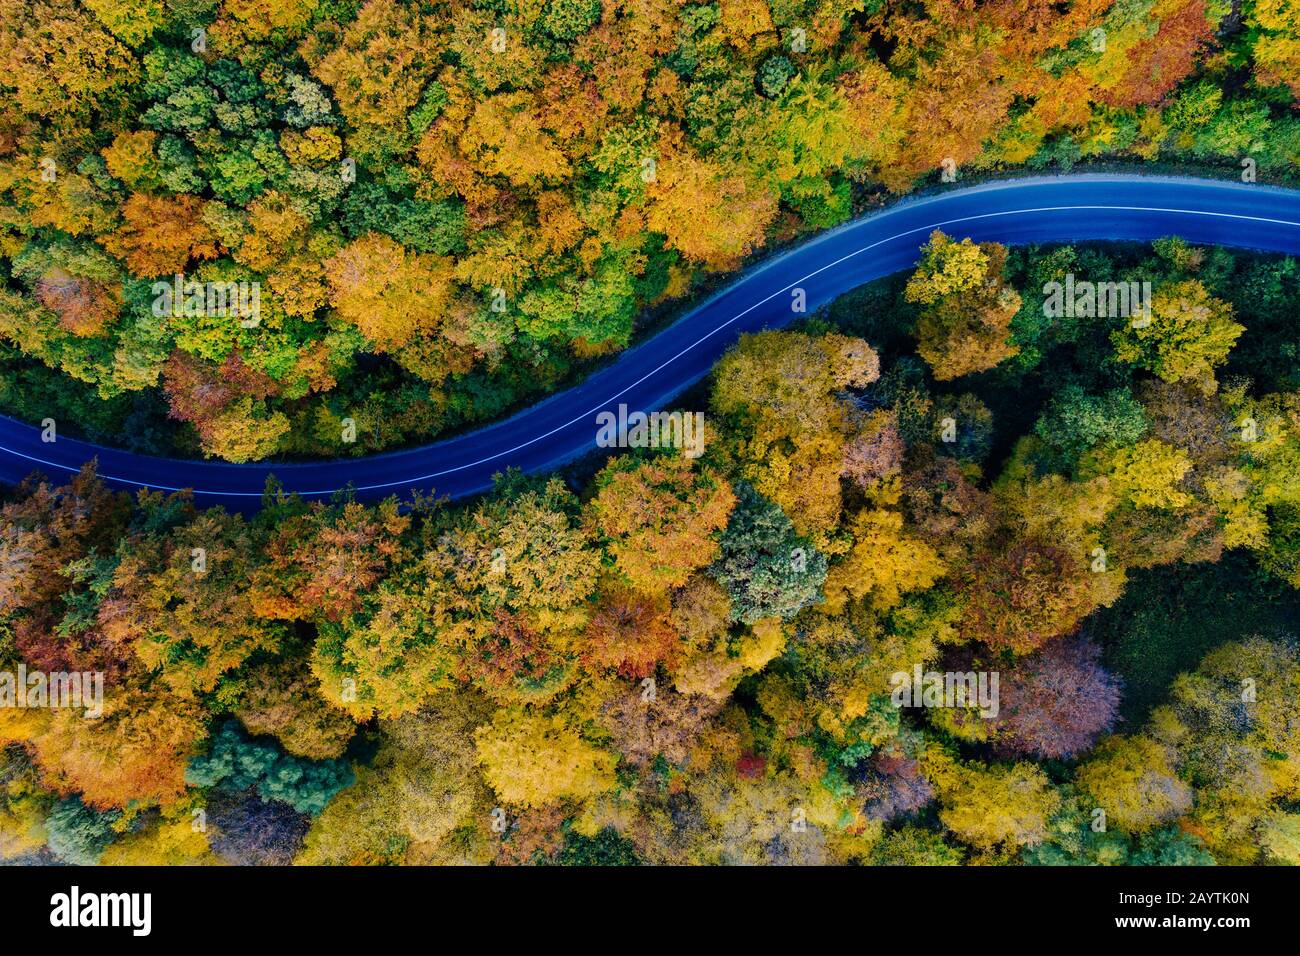 Drone view of a forest and a serpentine road in autumn with colorful trees Stock Photo